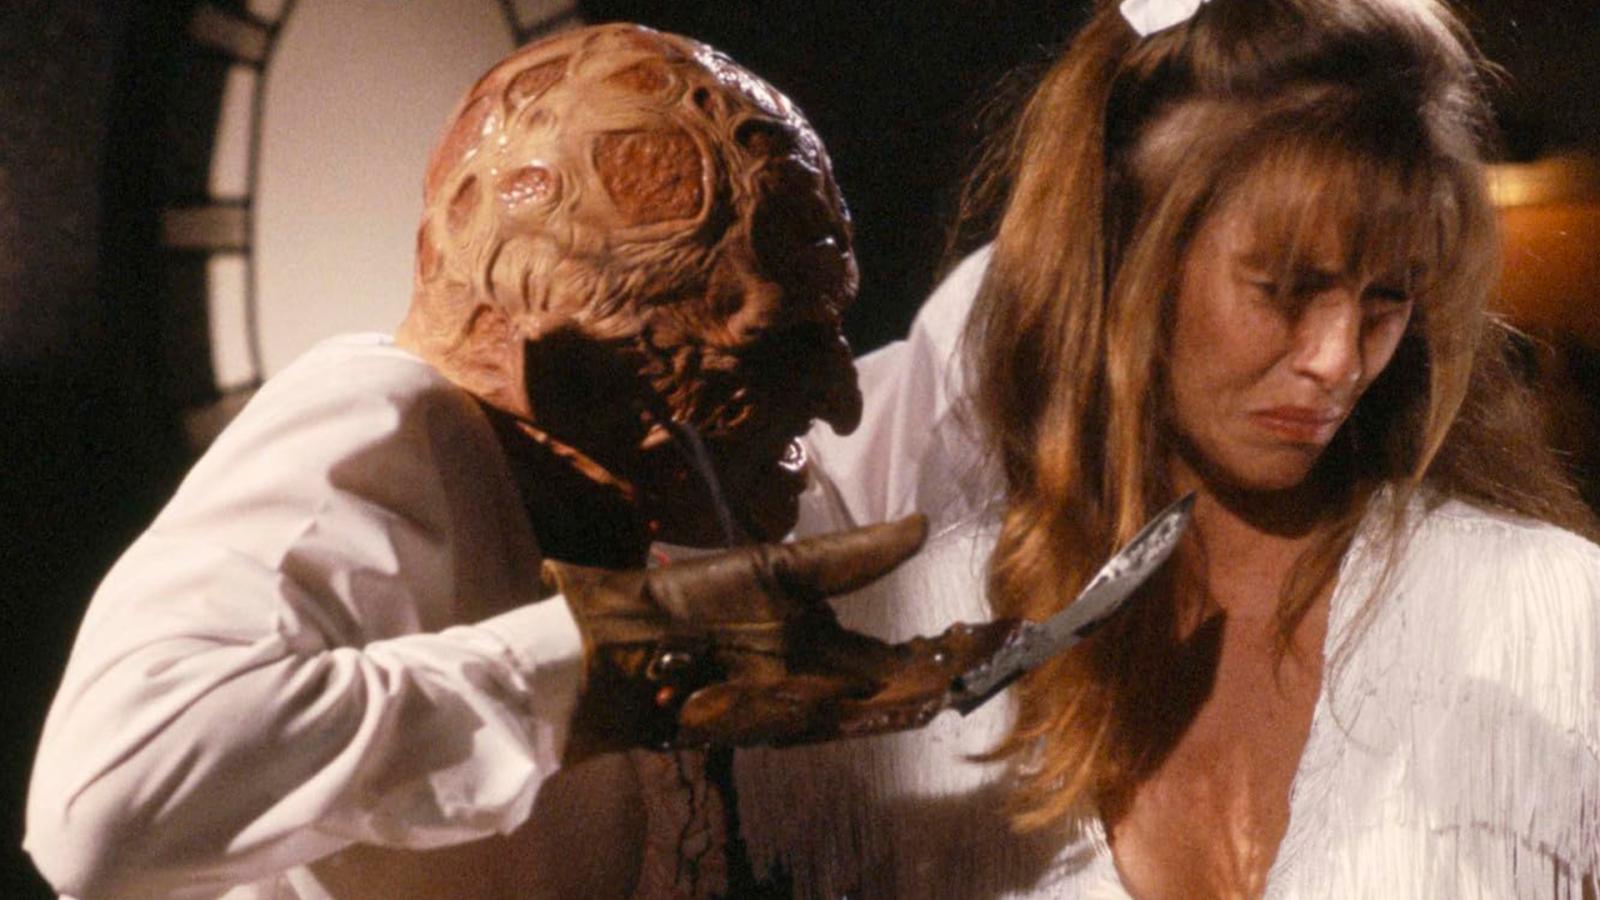 All 9 A Nightmare on Elm Street Movies, Ranked from Lackluster to Freddy Krueger Supremacy - image 4